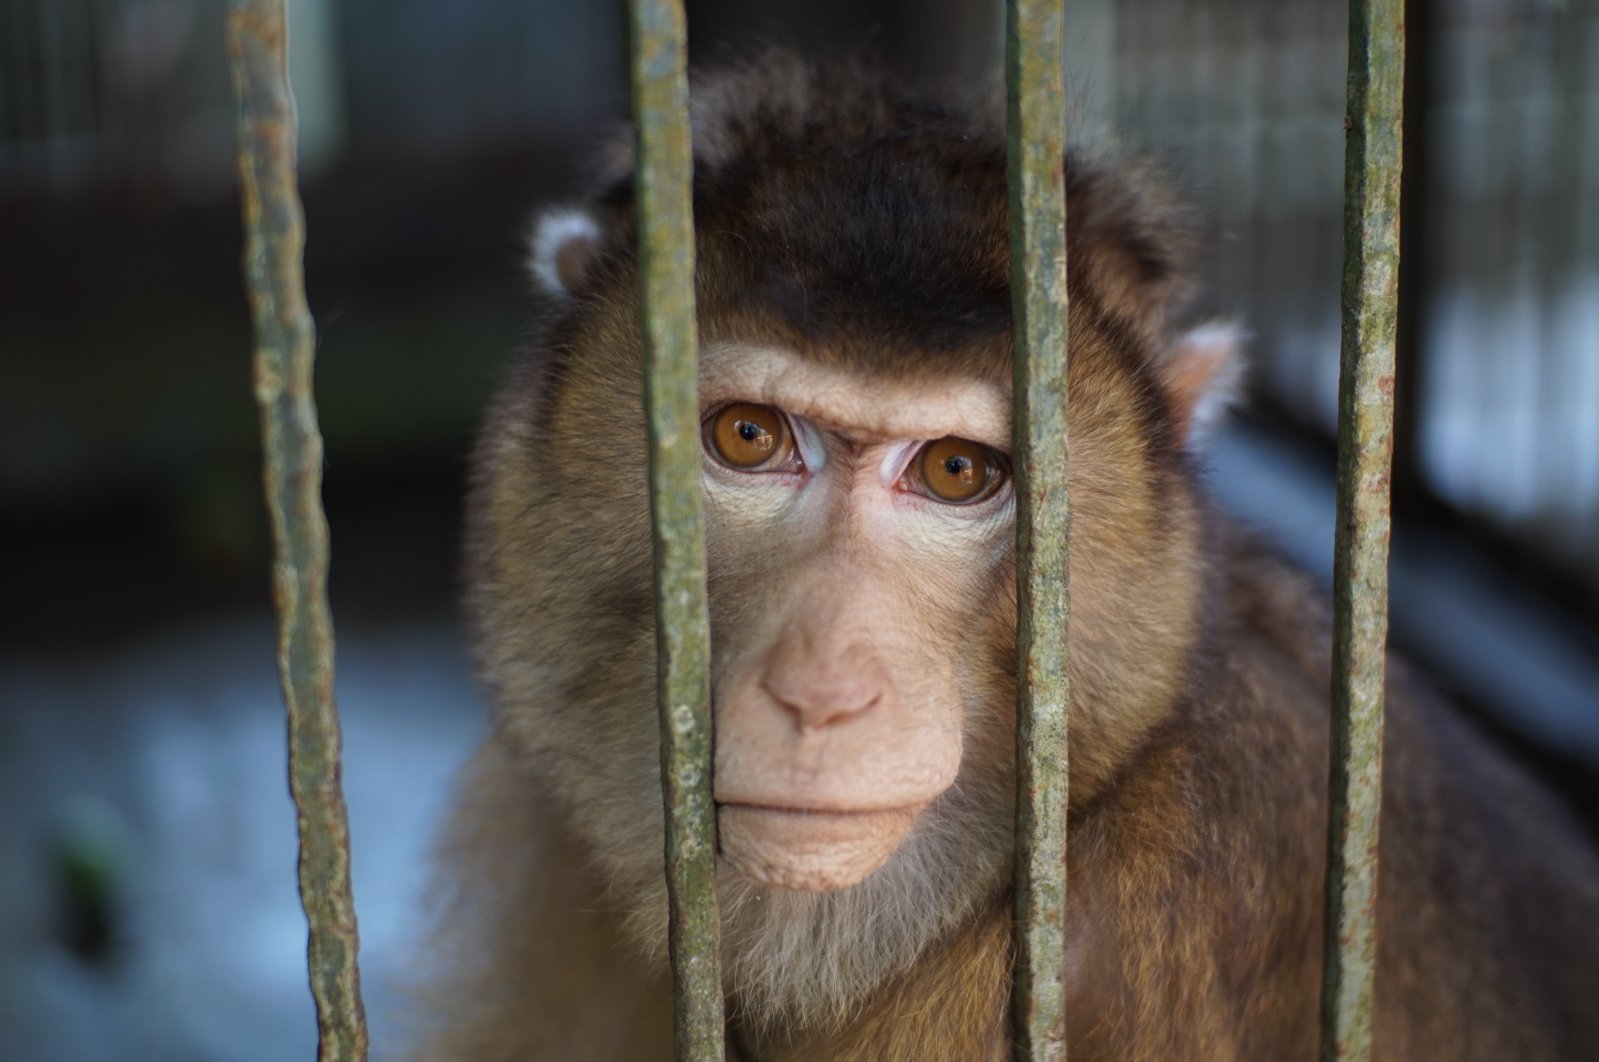 New Harvard experiments on monkeys set off intense controversy among scientists, reigniting ethical debate over animal testing. (Shutterstock Photo)